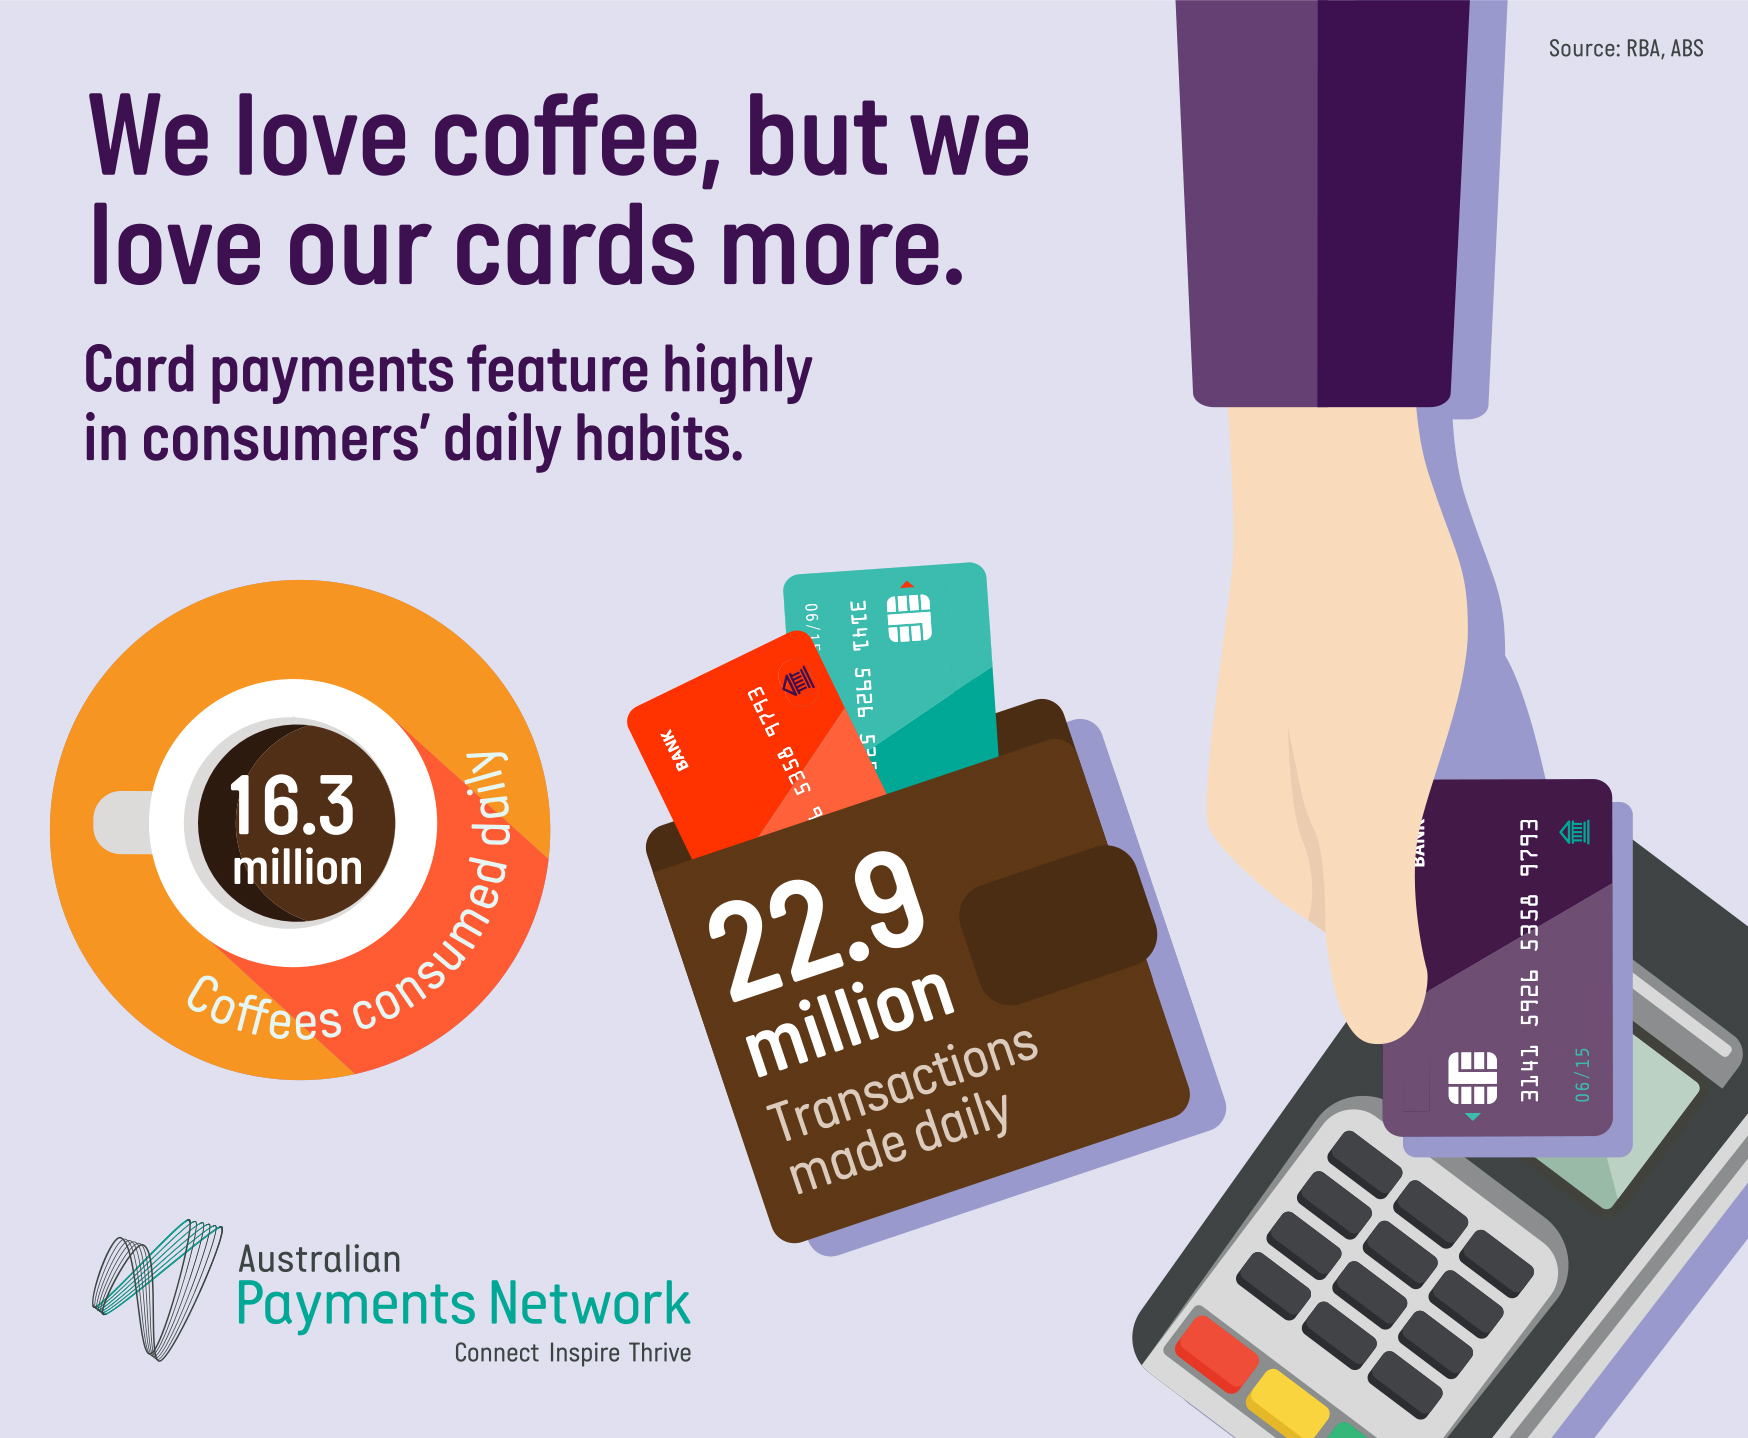 We love coffee, but we love our cards more